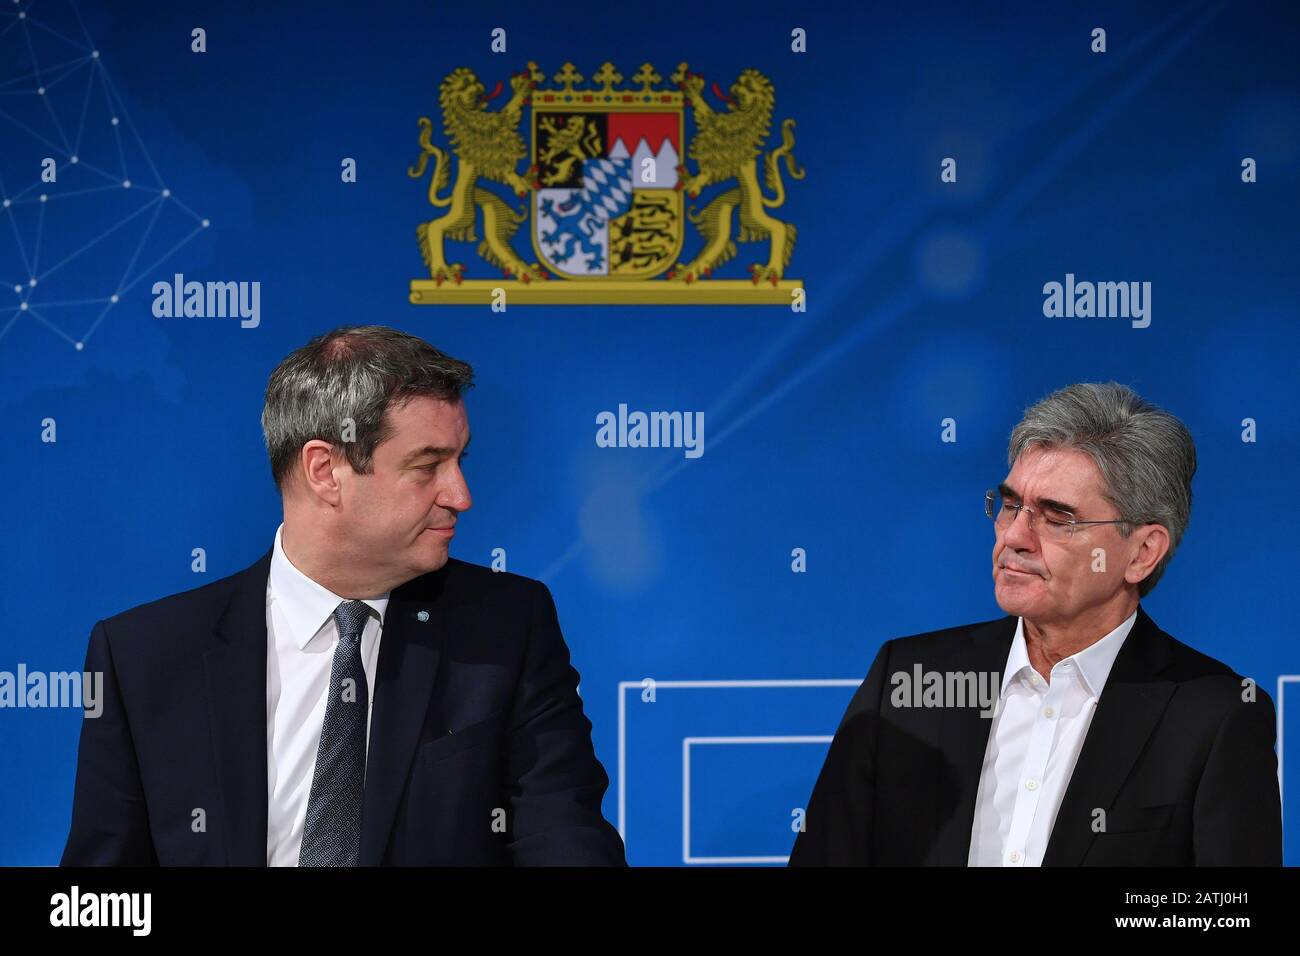 Markus SOEDER (Minister President Bavaria and CSU Chairman) with Joe KAESER (Management Chairman SIEMENS). At the invitation of Prime Minister Dr. Markus Soeder meet experts in the field of future technologies for high-tech Sumwith Bayern.KI, Künstliche Intelligenz. On February 3rd, 2020 Technical University Munich (TUM) in Garching. | usage worldwide Stock Photo